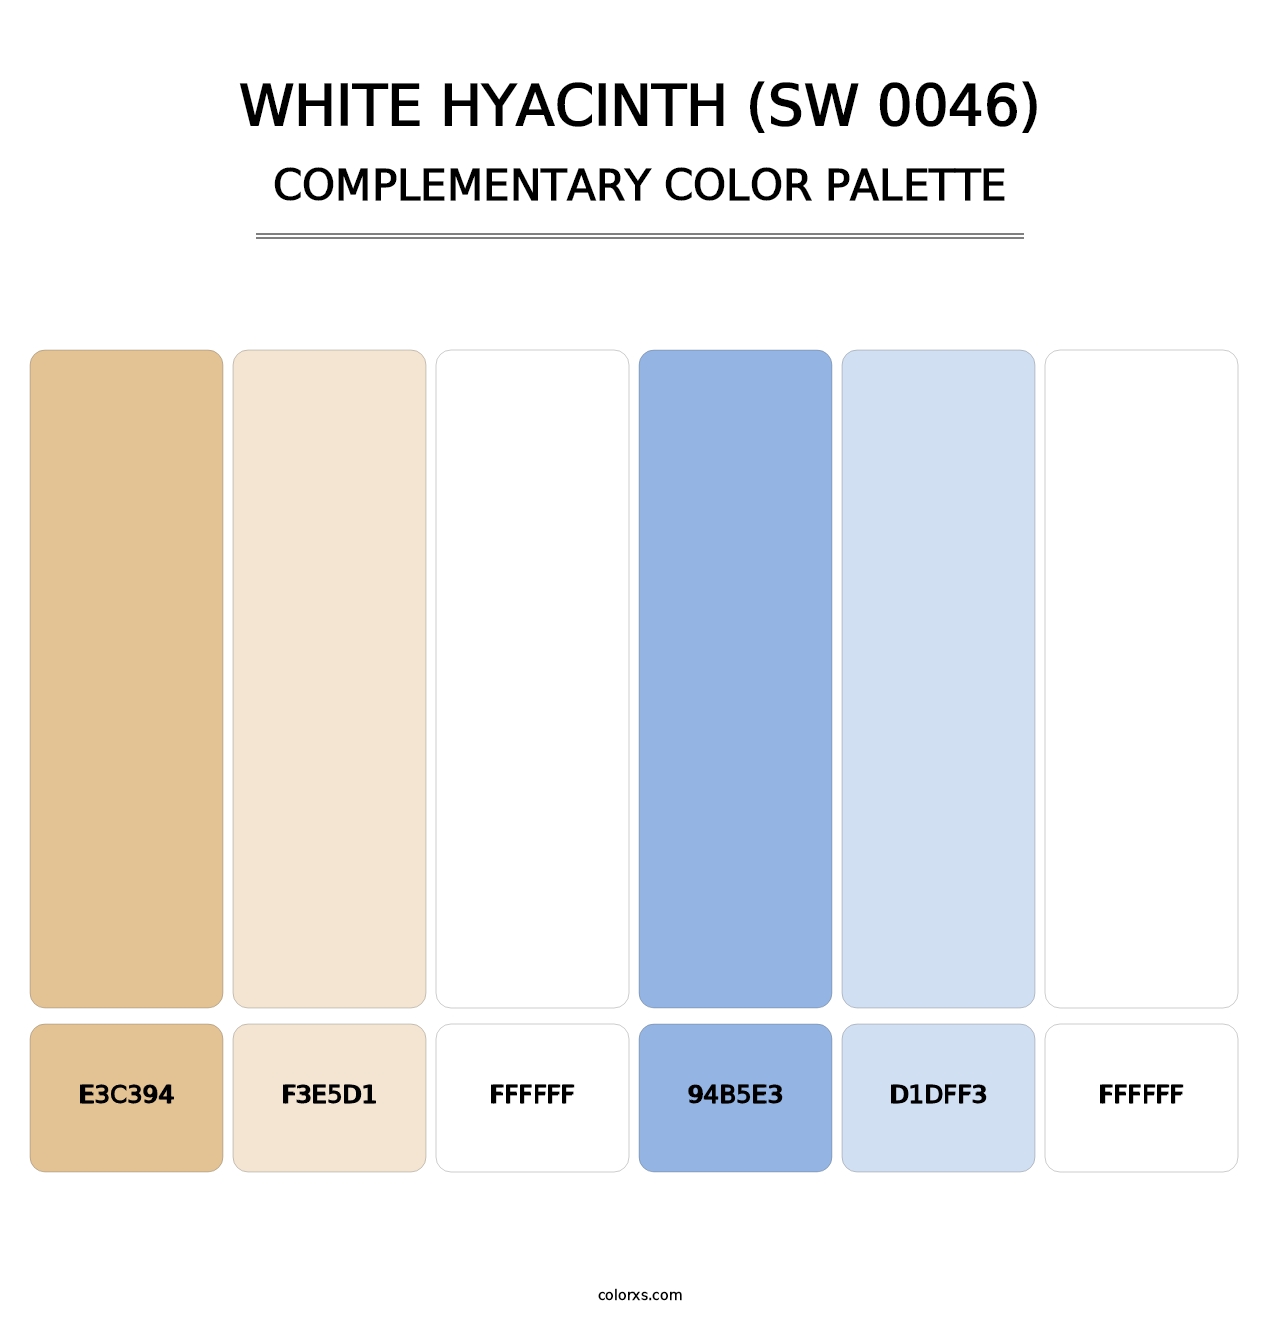 White Hyacinth (SW 0046) - Complementary Color Palette